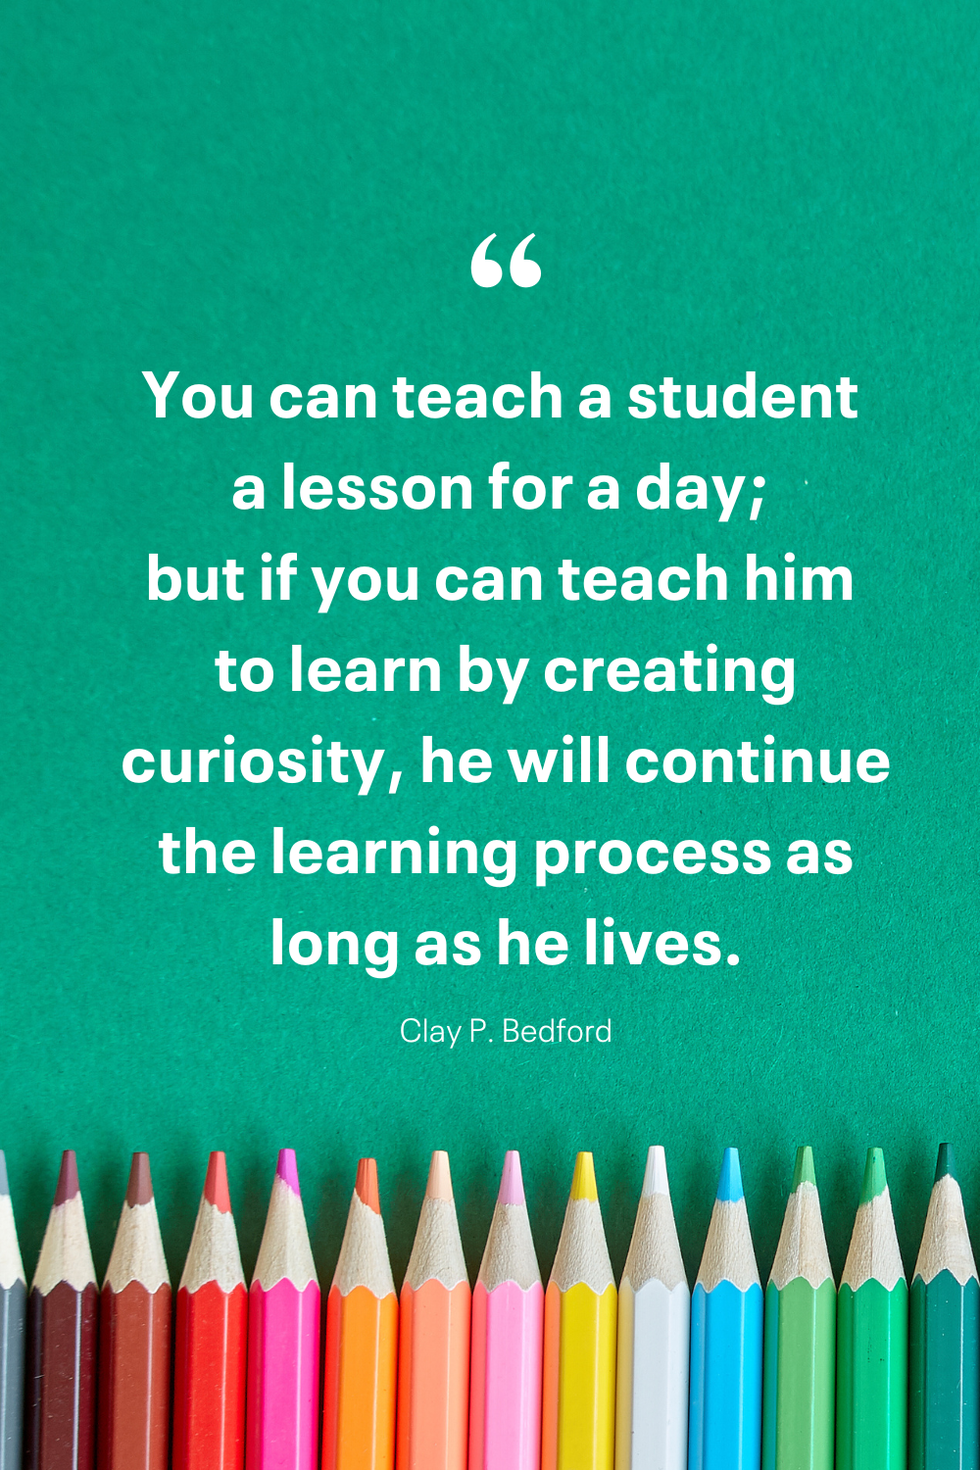 you can teach a student a lesson for a day but if you can teach him to learn by creating curiosity, he will continue the learning process as long as he lives clay p bedford